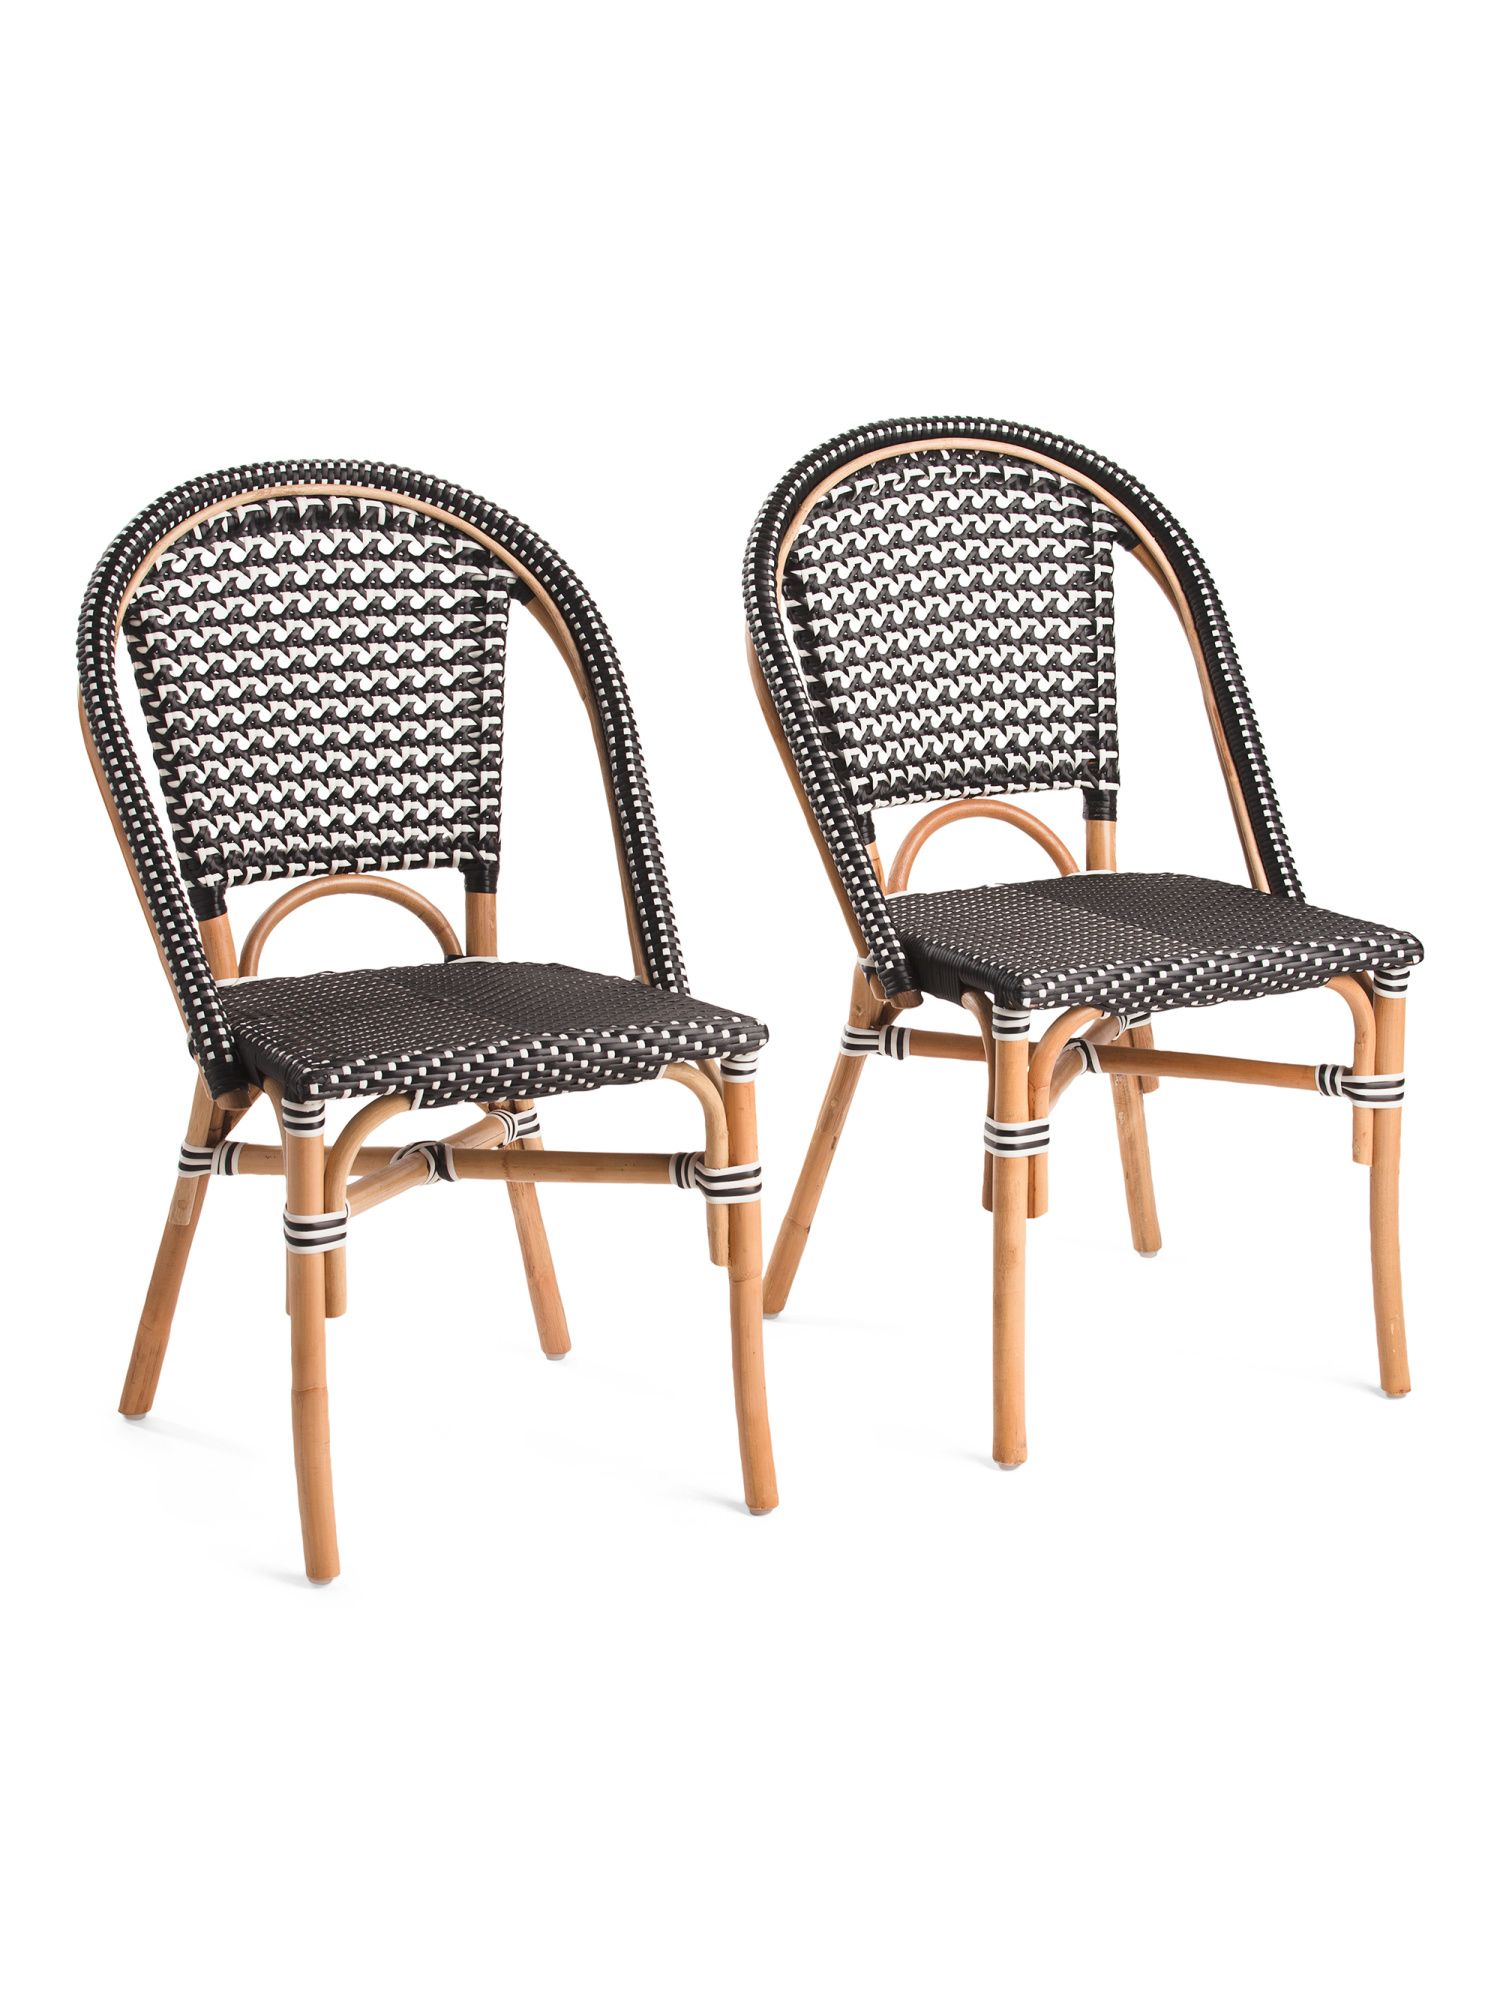 Set Of 2 Indoor Outdoor Patterned Bistro Chairs | TJ Maxx